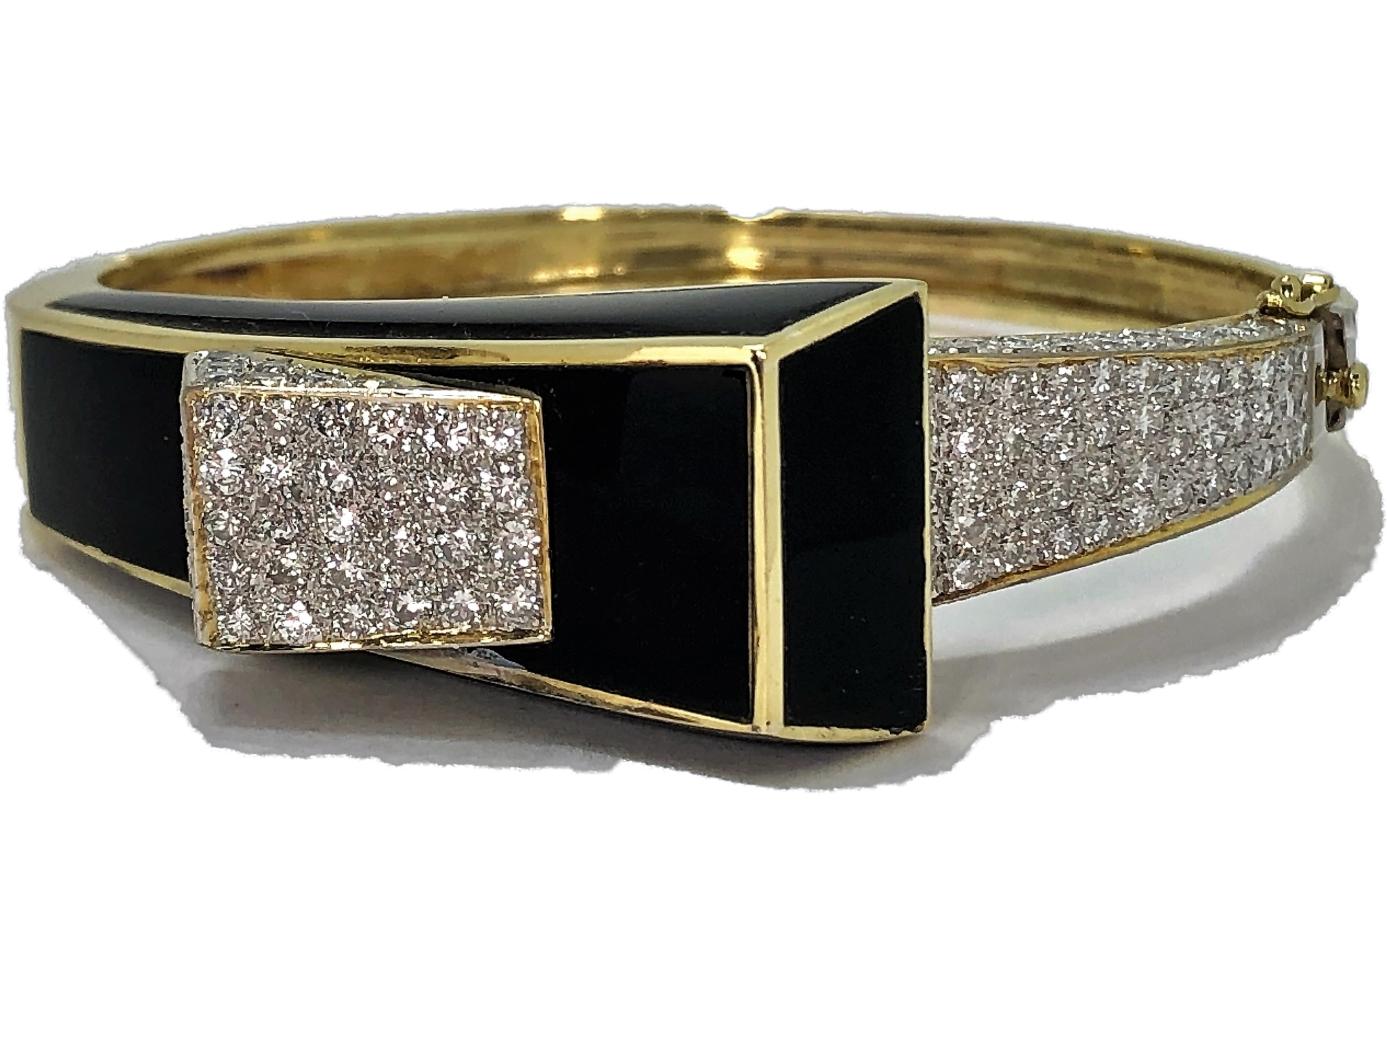 Fabulous Modernist bangle made of 18K Yellow Gold inset with five custom cut onyx panels, and with 154 round brilliant cut diamonds weighing an approximate total of 4.25CT of overall G/H Color and VS2 Clarity. This unique cuff fits a medium to large